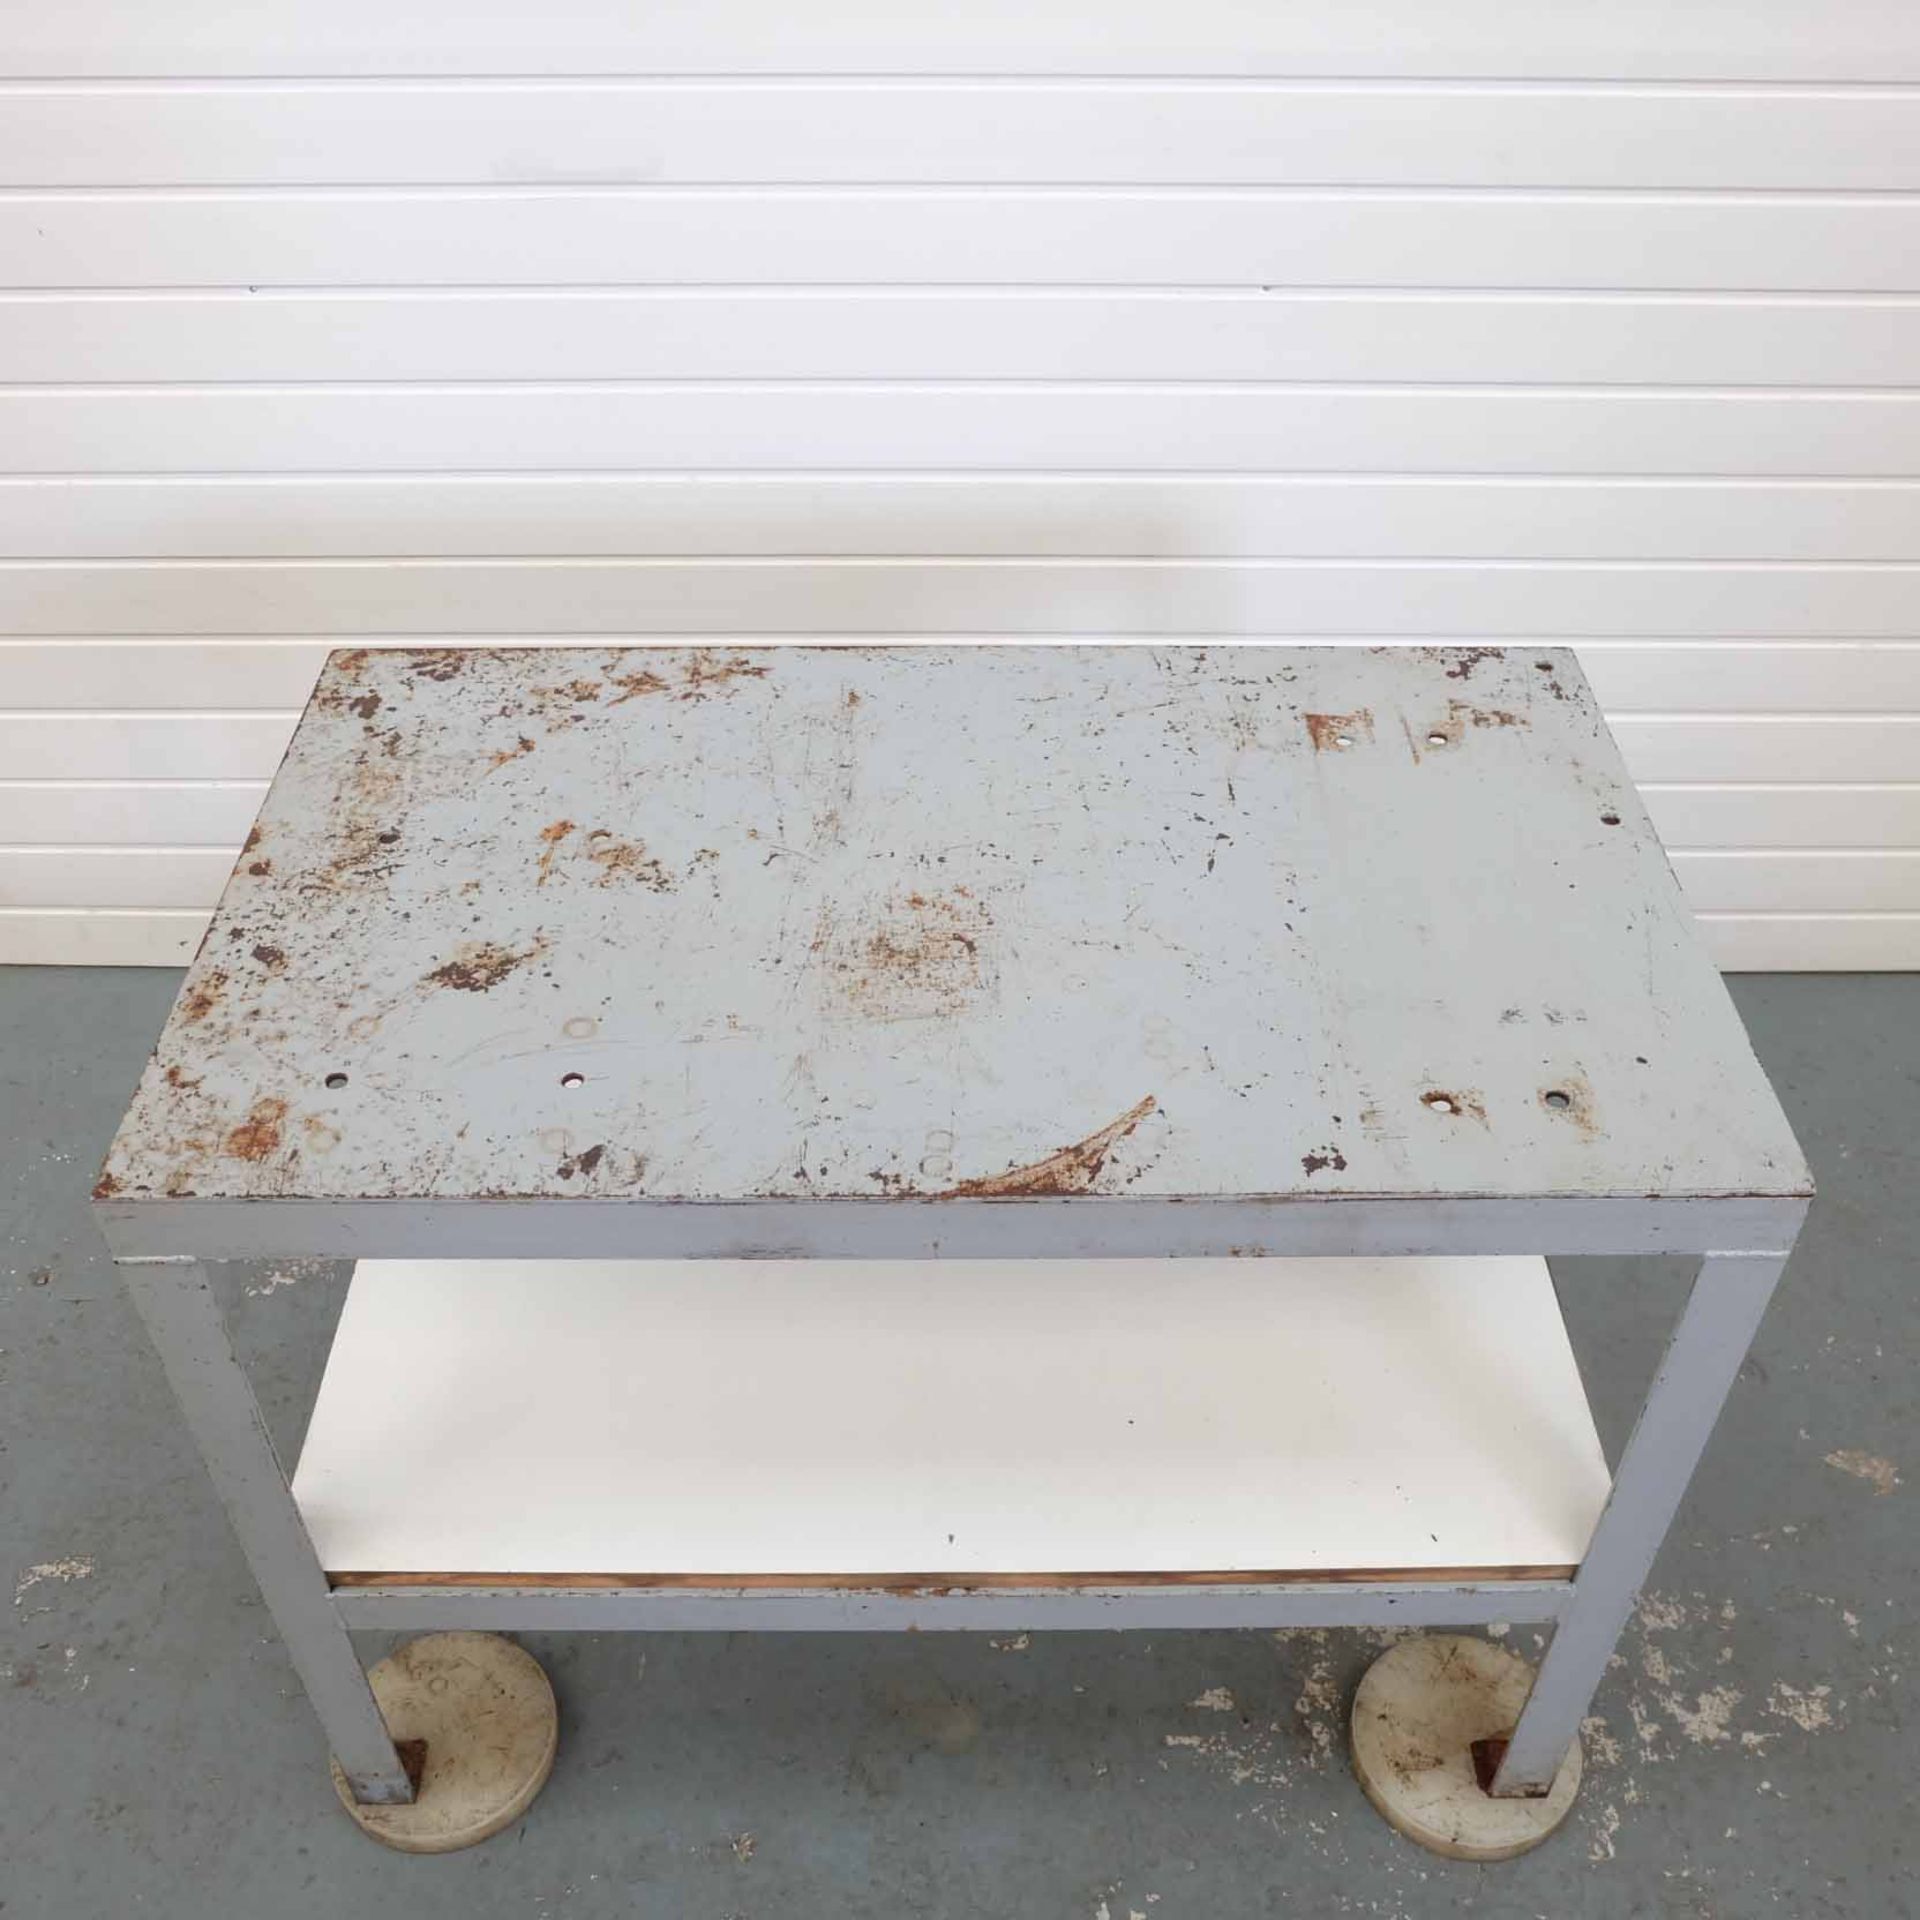 Steel Table. Size 1000mm x 590mm x 755mm High. - Image 3 of 3